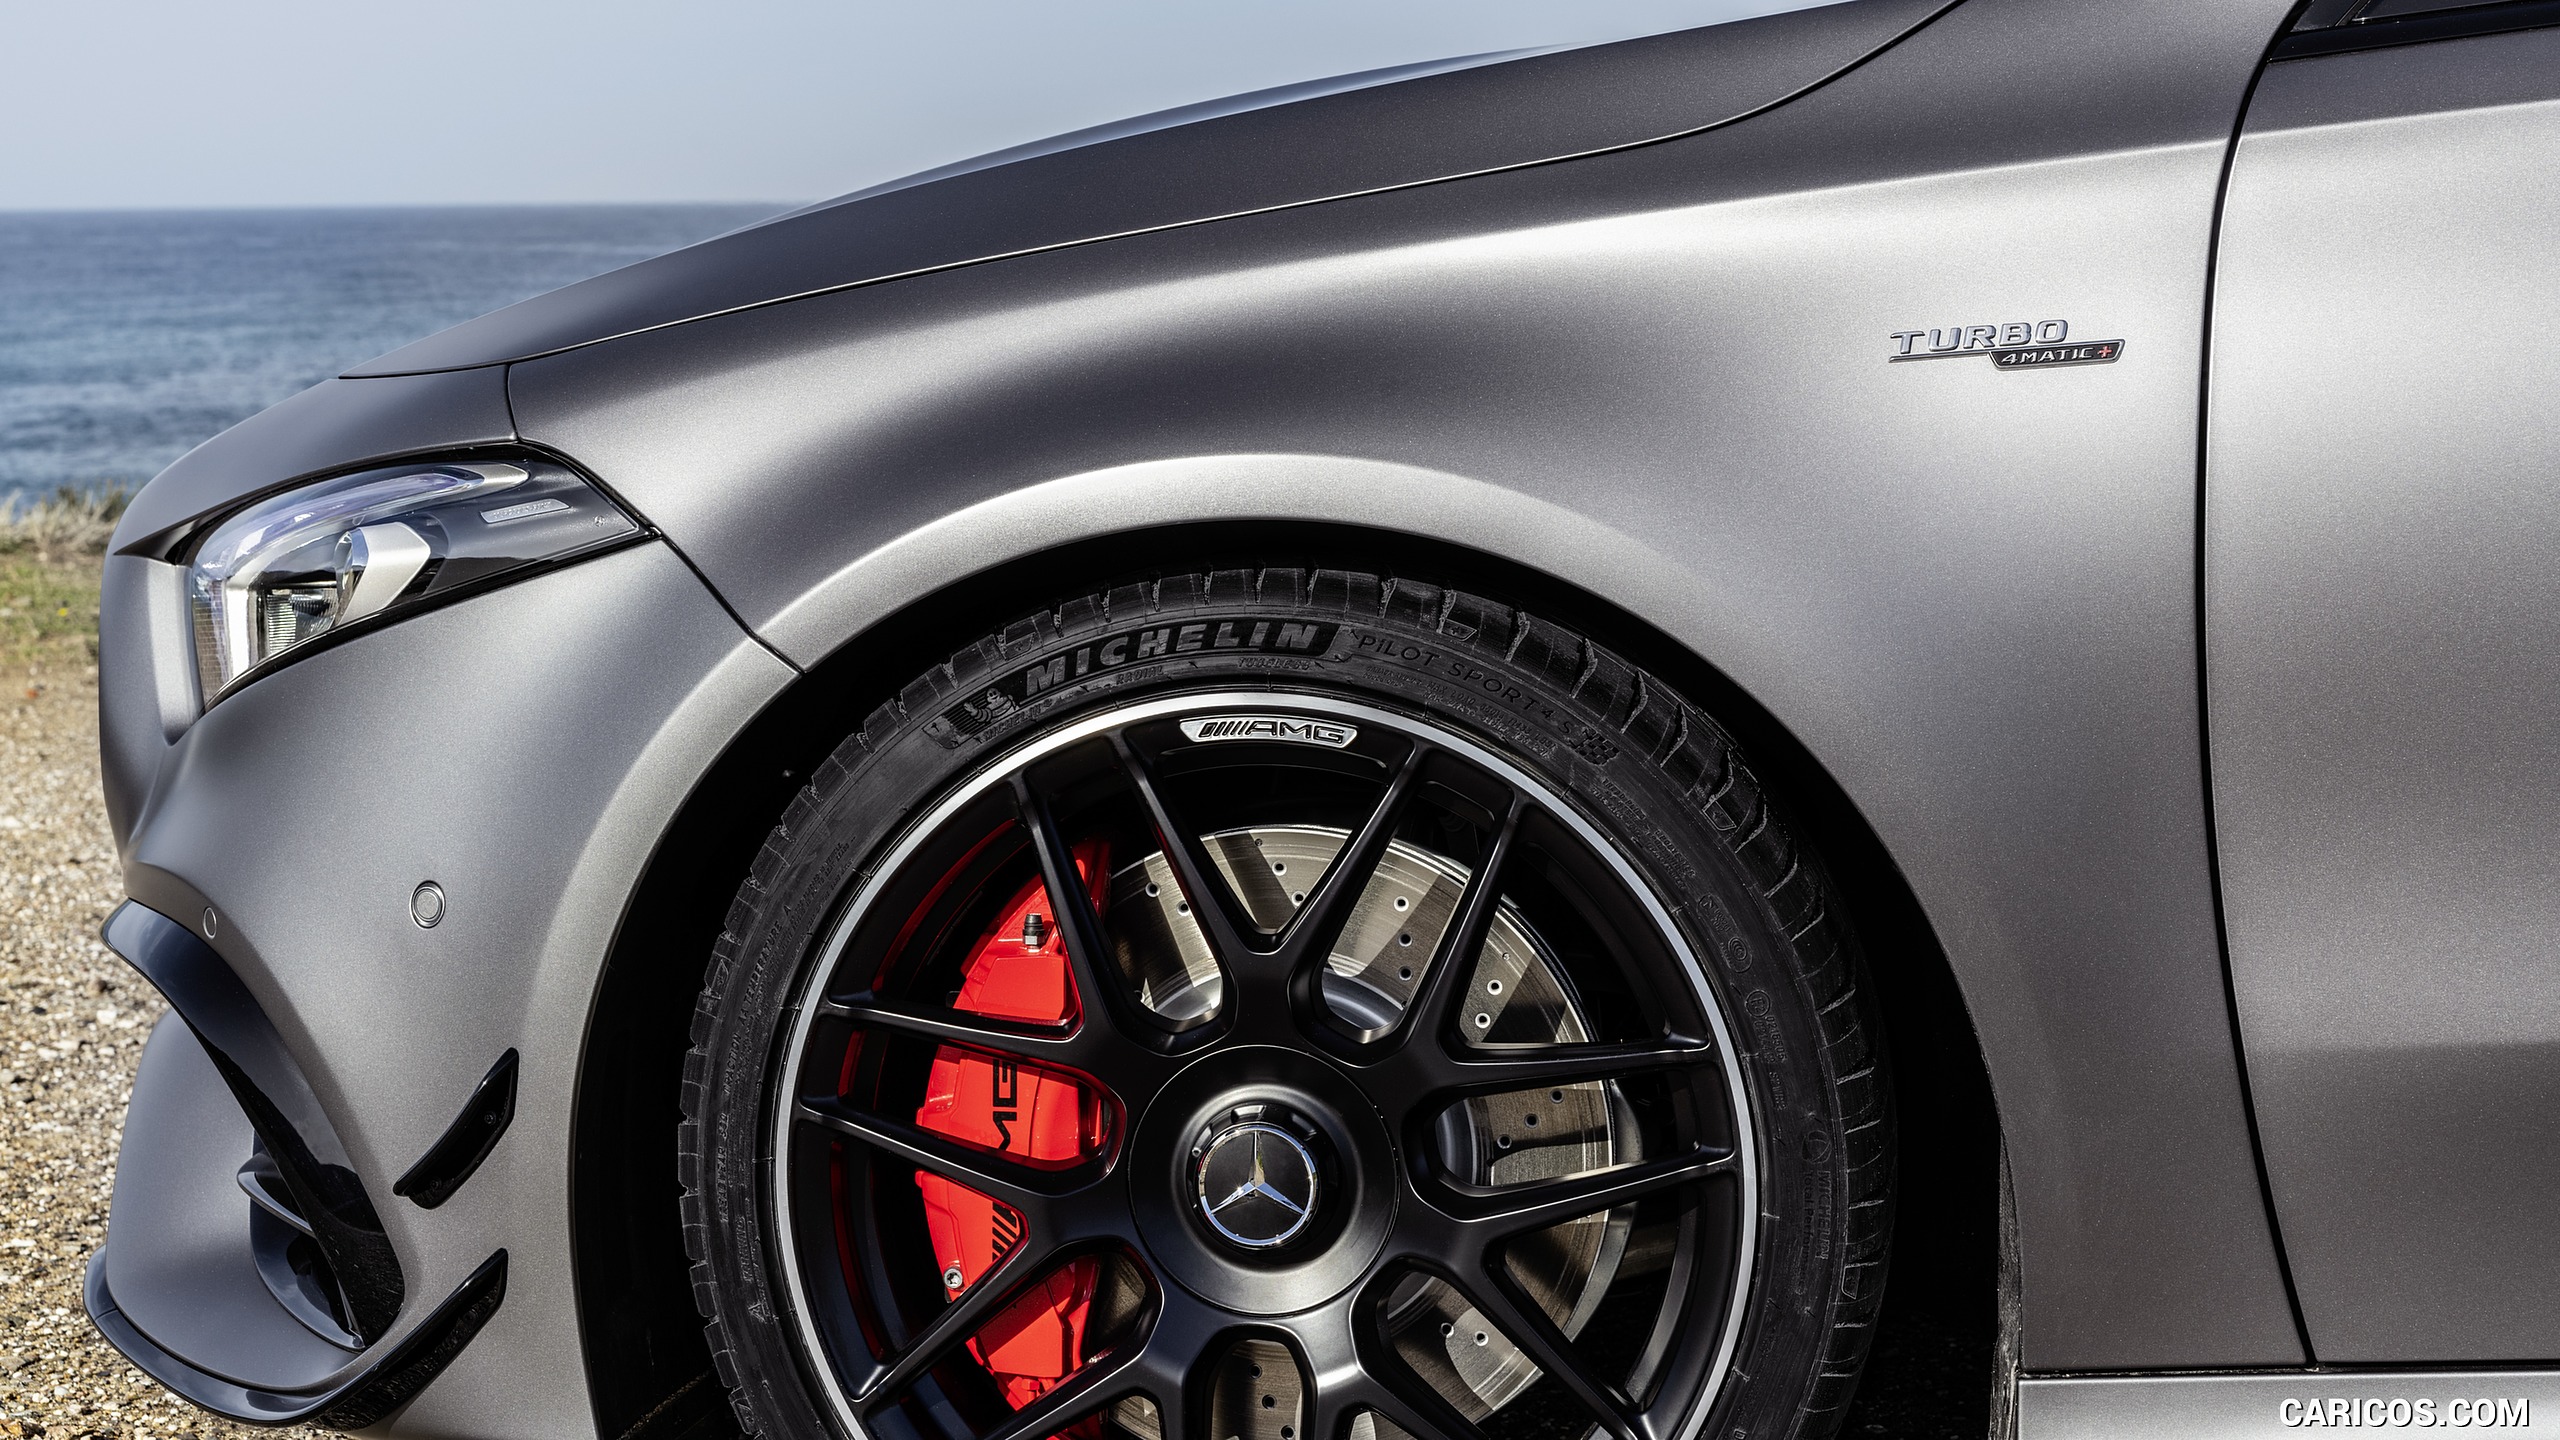 2020 Mercedes-AMG A 45 S 4MATIC+ - Wheel, #29 of 188